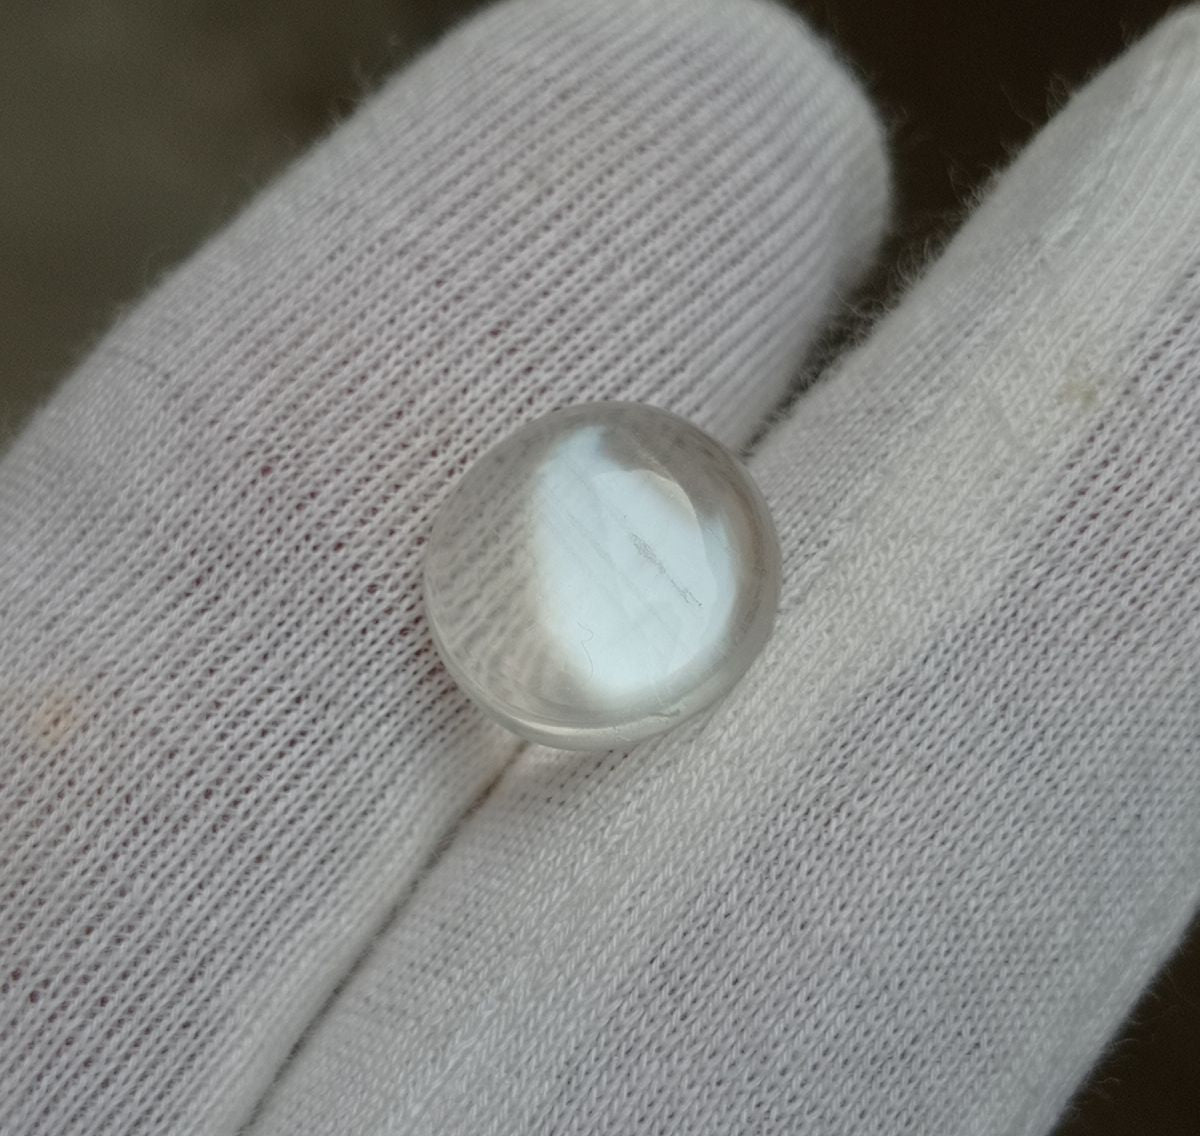 3.45ct Natural Transparent Moonstone with White Sheen - Adularia Moonstone - Blue Moonstone - June Birthstone -11x11x3.5mm